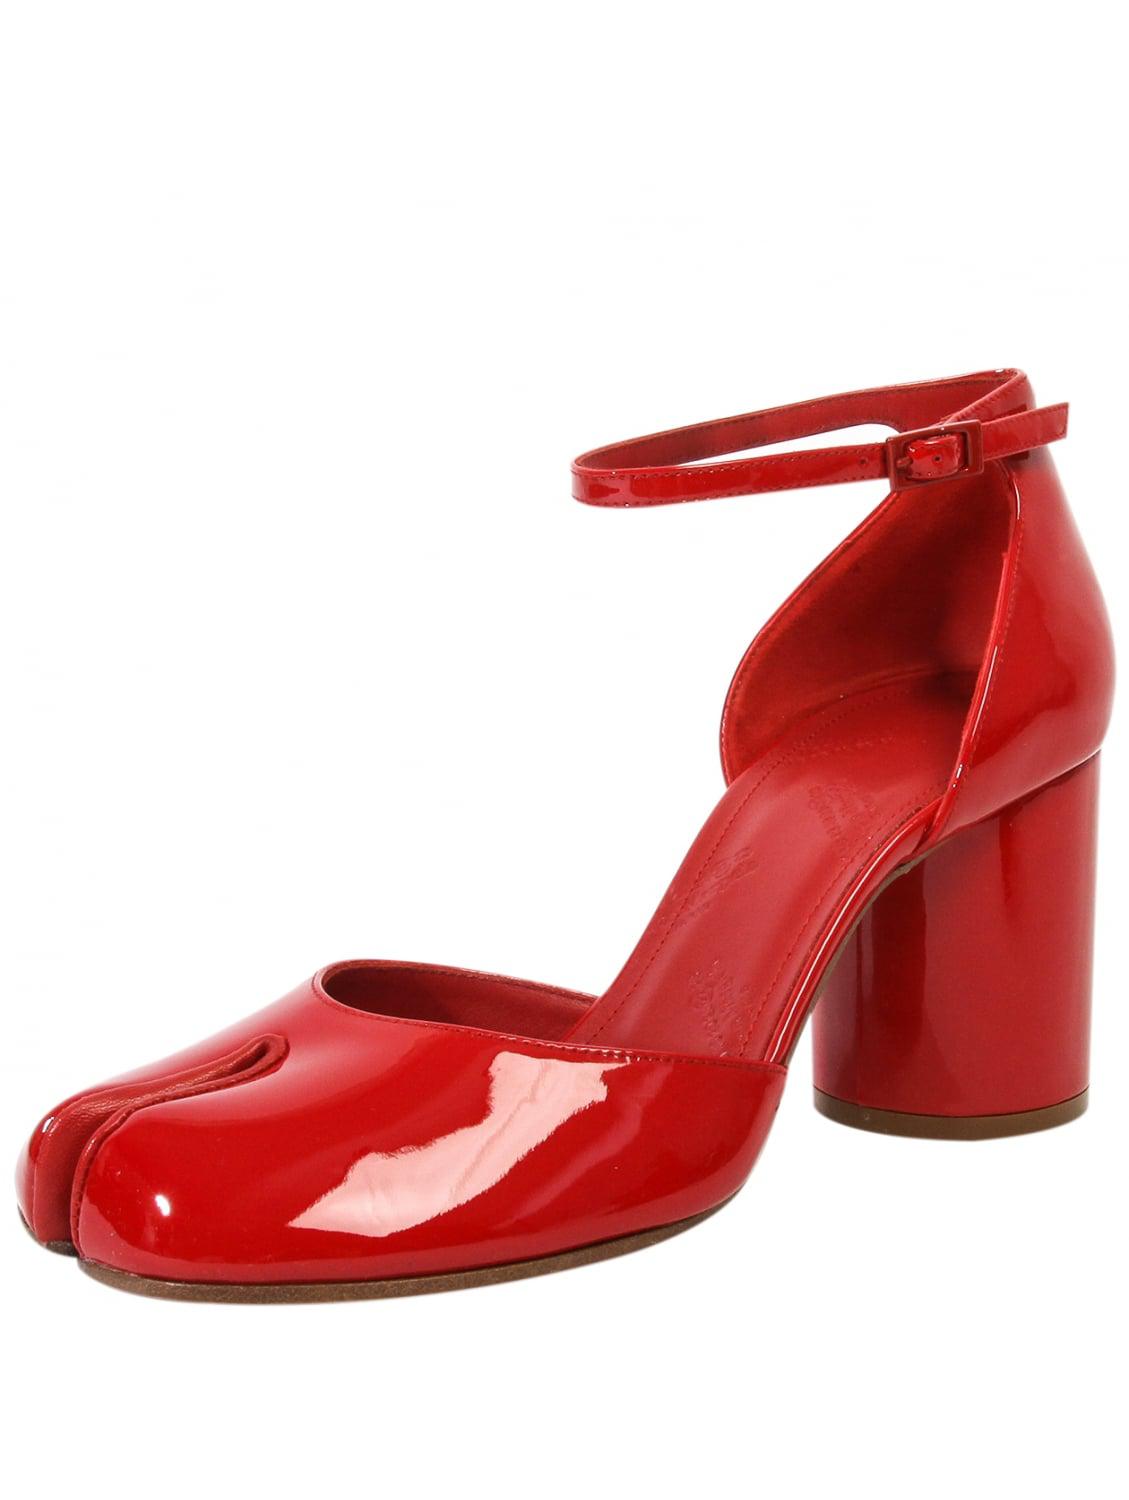 Maison Margiela Patent Leather Tabi Pumps in Red - Lyst